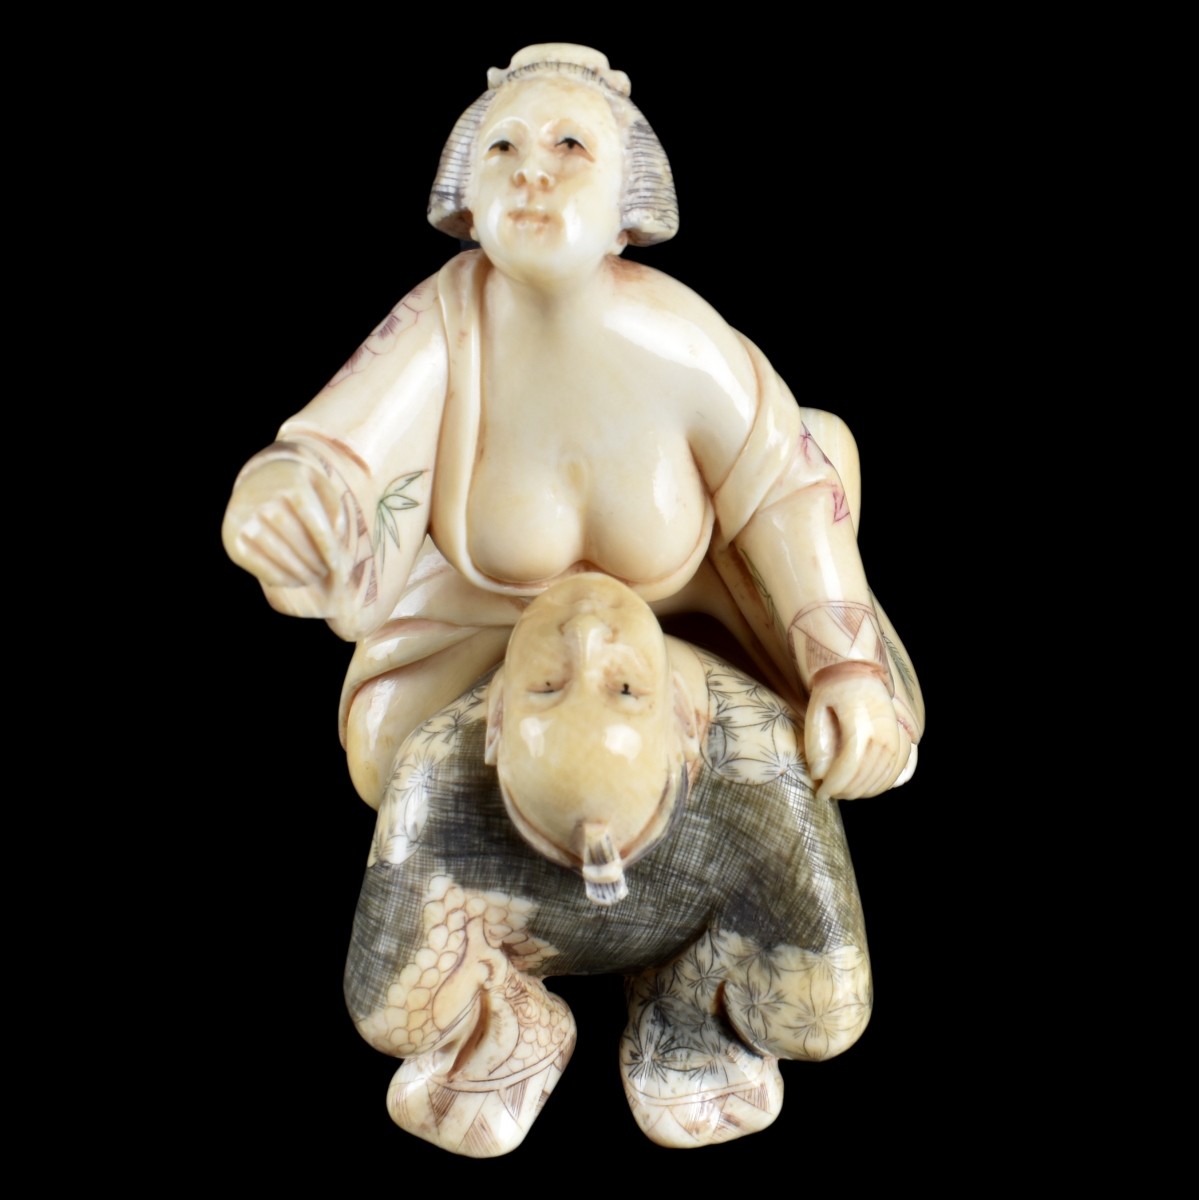 Mid 20C Erotic Two part Carved Ivory Figurine